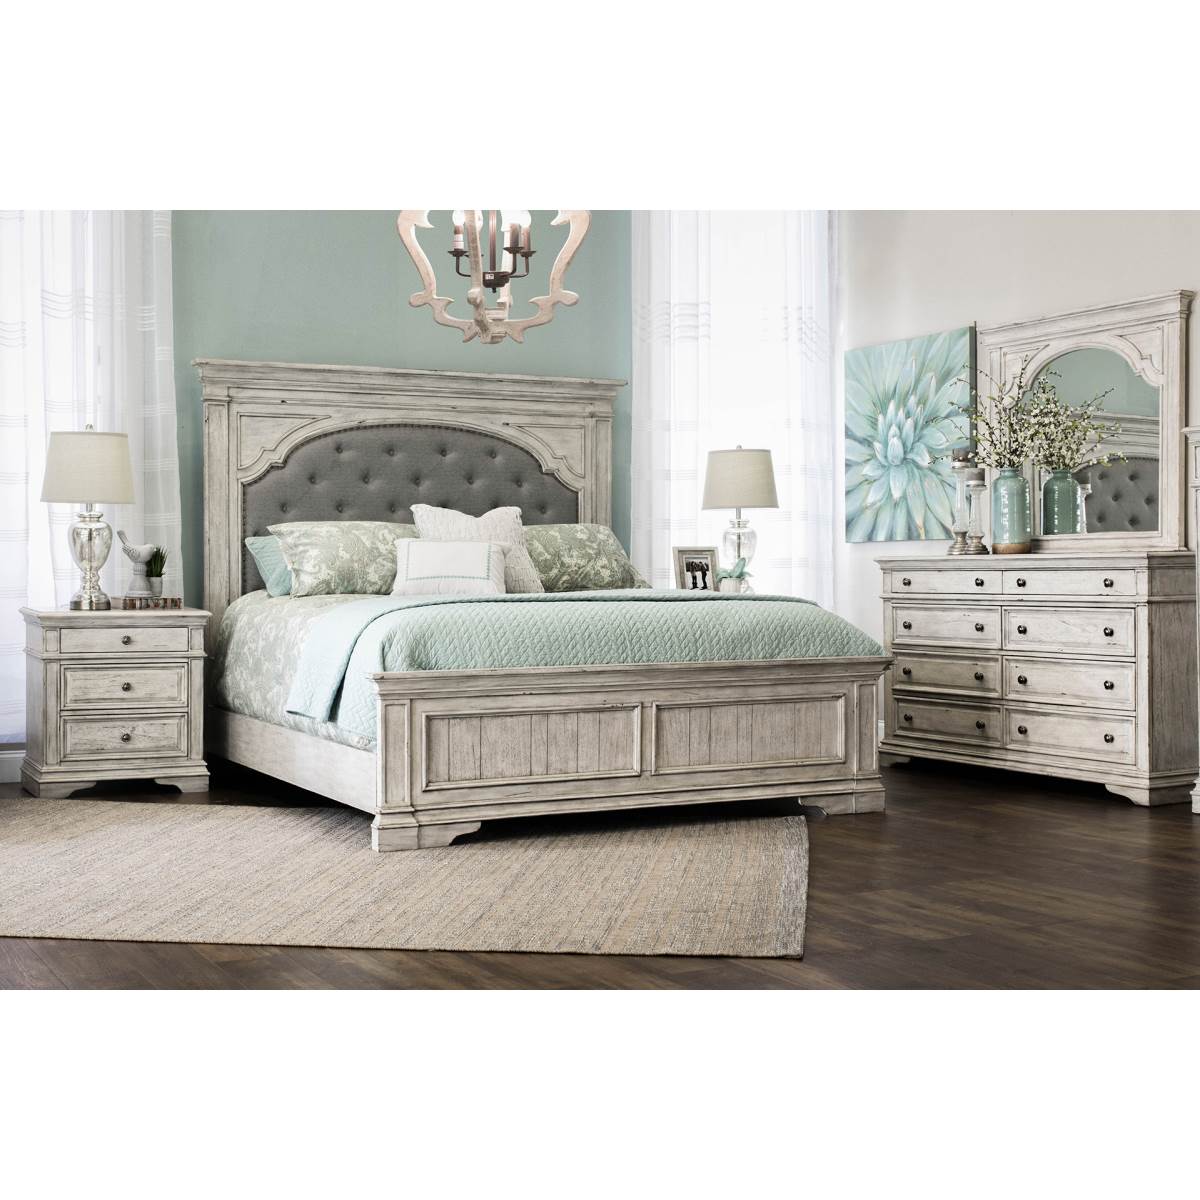 Steve Silver Co. Highland Park Cathedral White King Bed, Dresser, Mirror & Nightstand